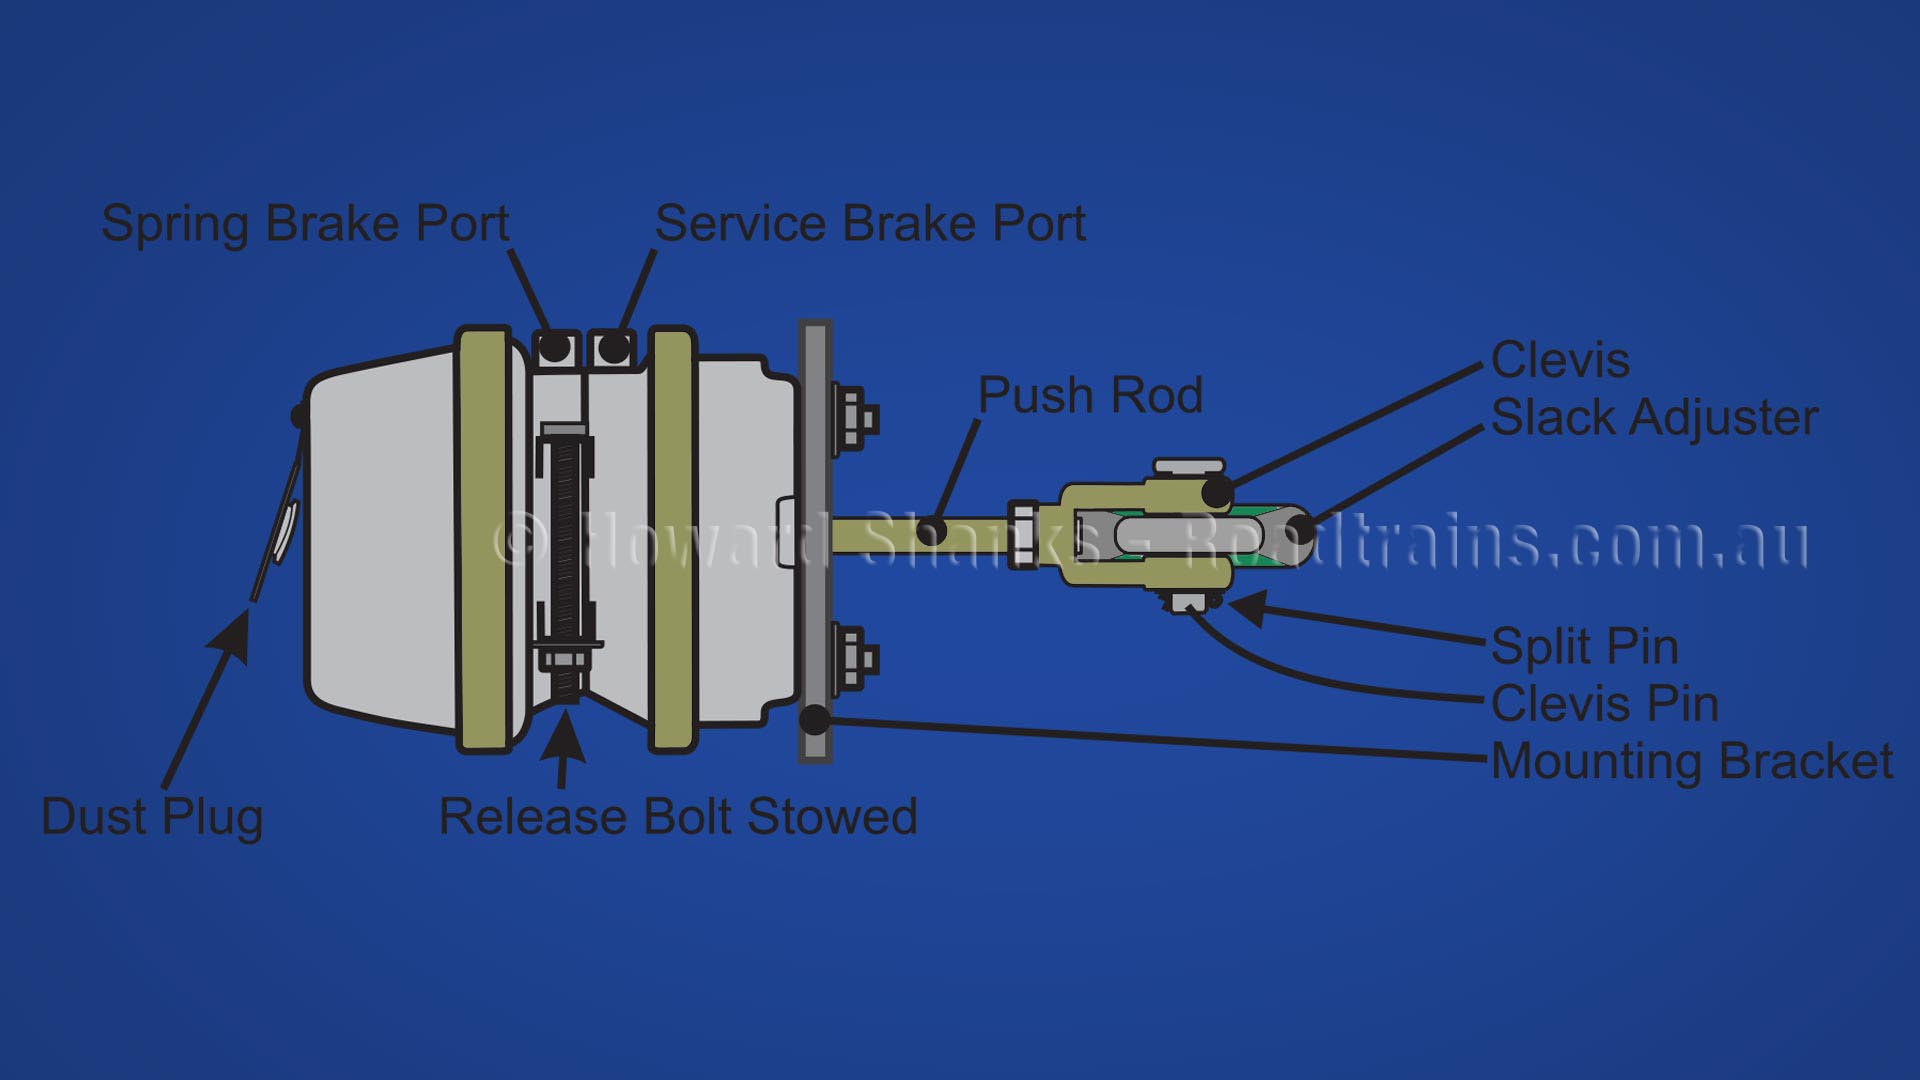 Street Rod Brake System Diagram How to Manually Release Truck Brakes â Australian Roadtrains Of Street Rod Brake System Diagram